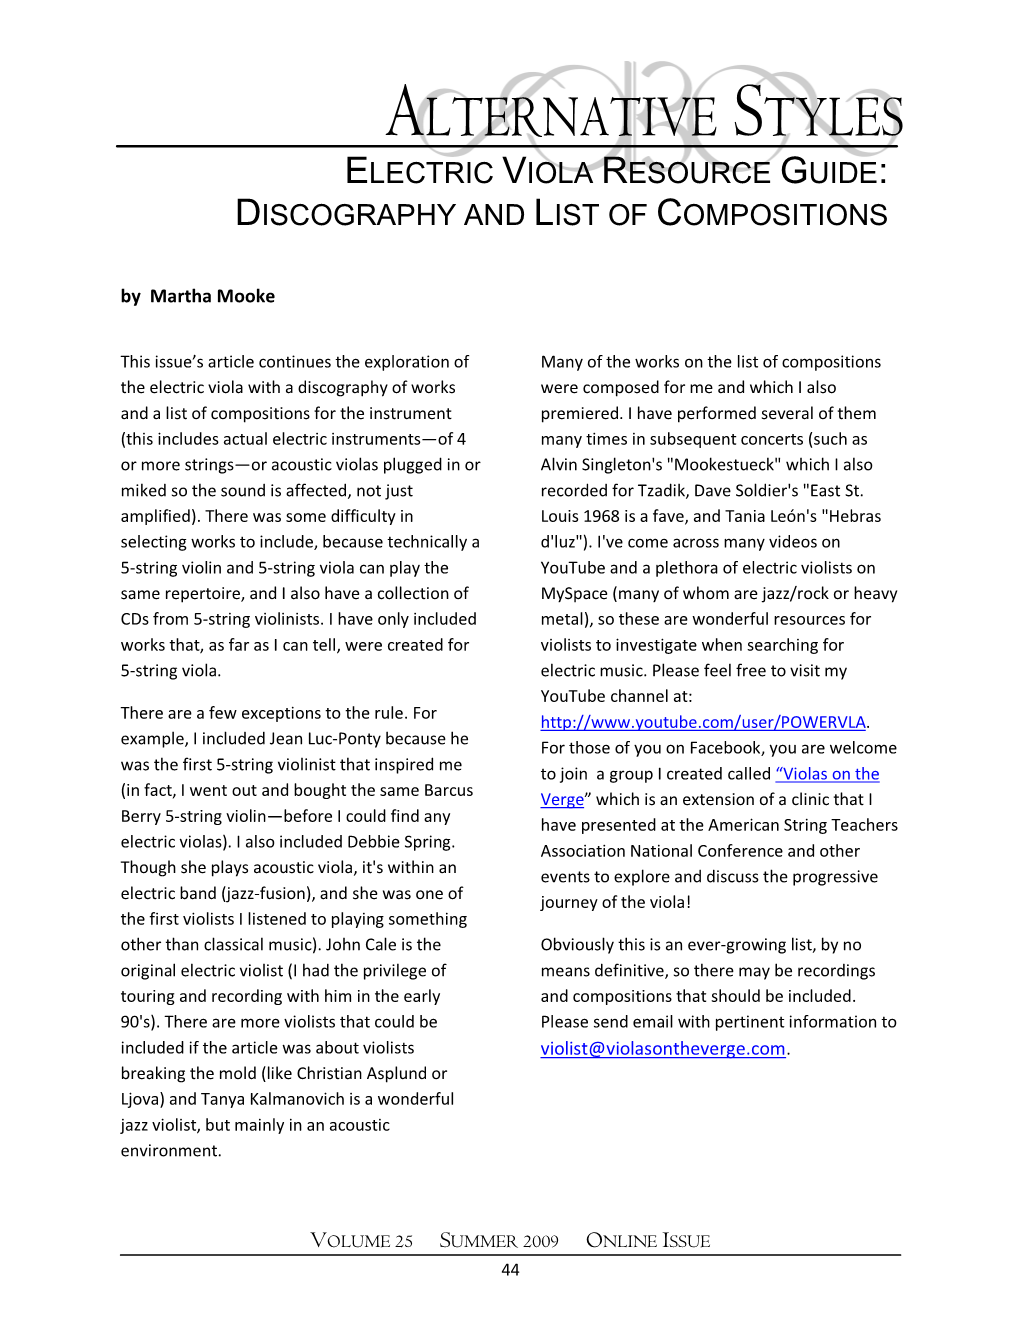 ELECTRIC VIOLA RESOURCE GUIDE: DISCOGRAPHY and LIST of COMPOSITIONS by Martha Mooke